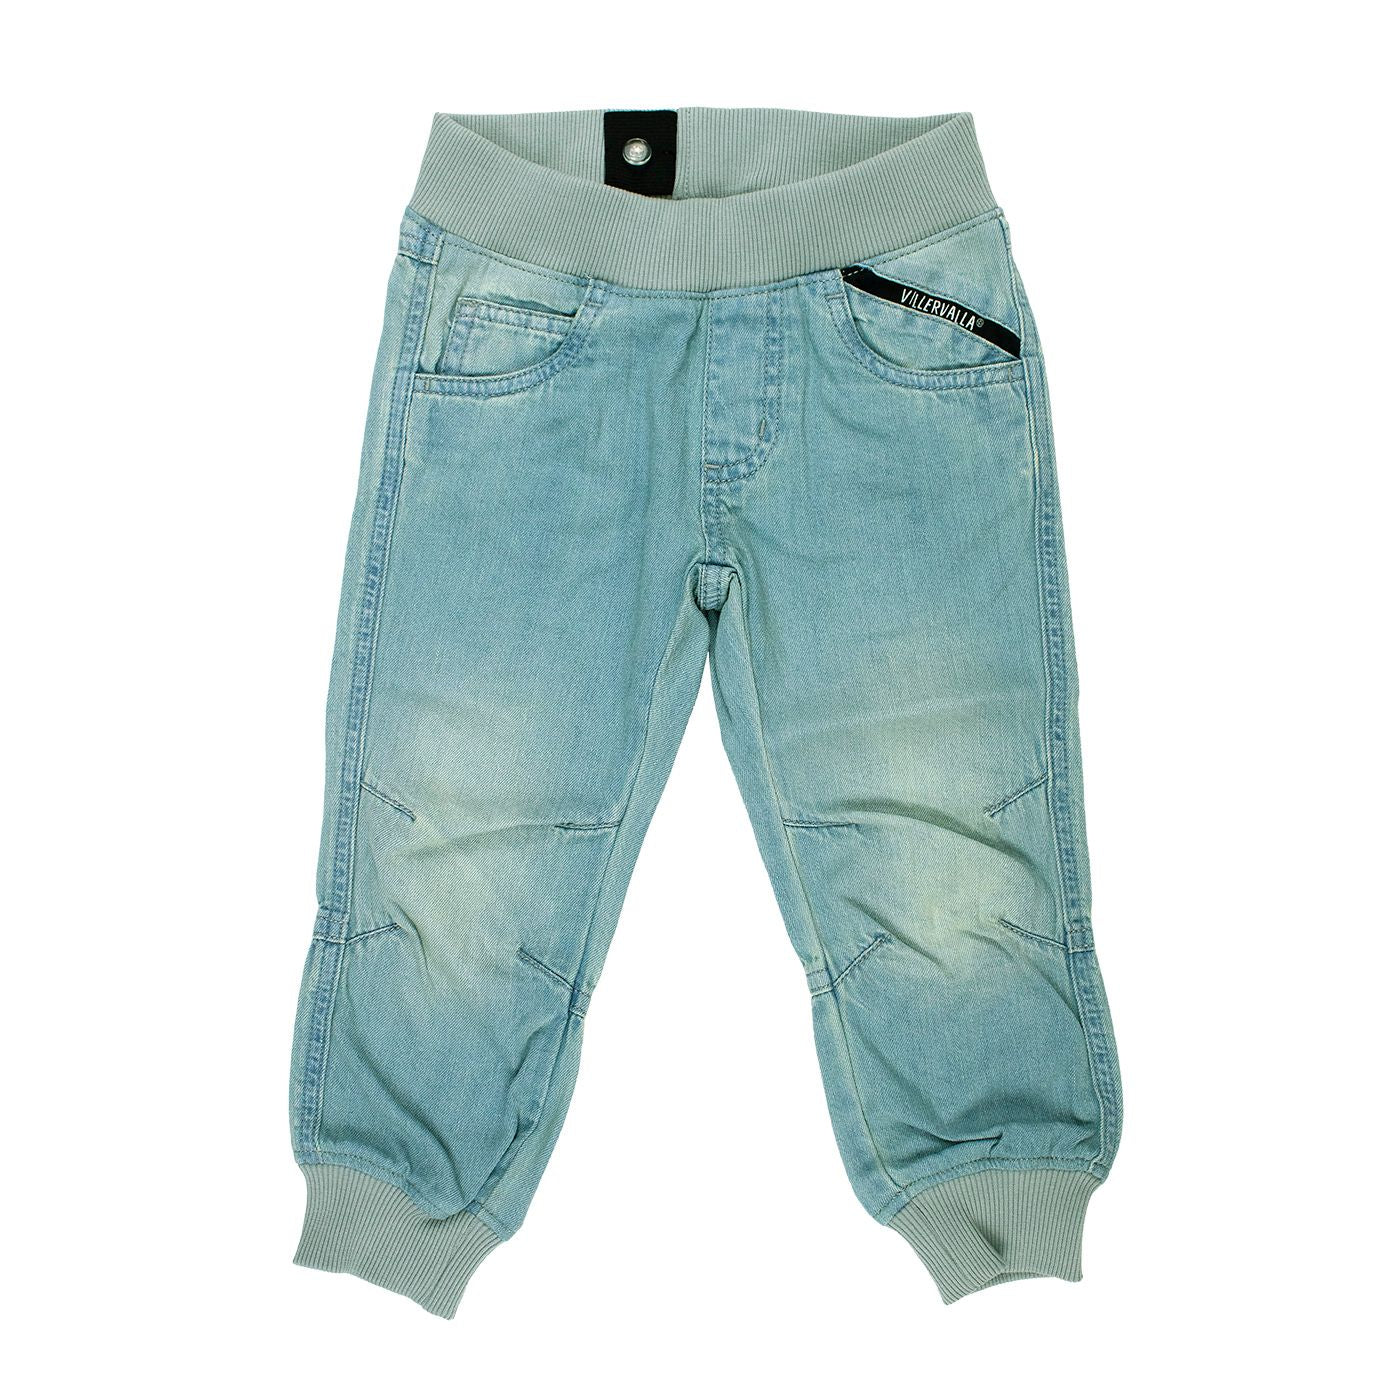 Light Wash/Fossil Soft Denim Relaxed Jeans - 2 Left Size 2-3 & 11-12 years-Villervalla-Modern Rascals